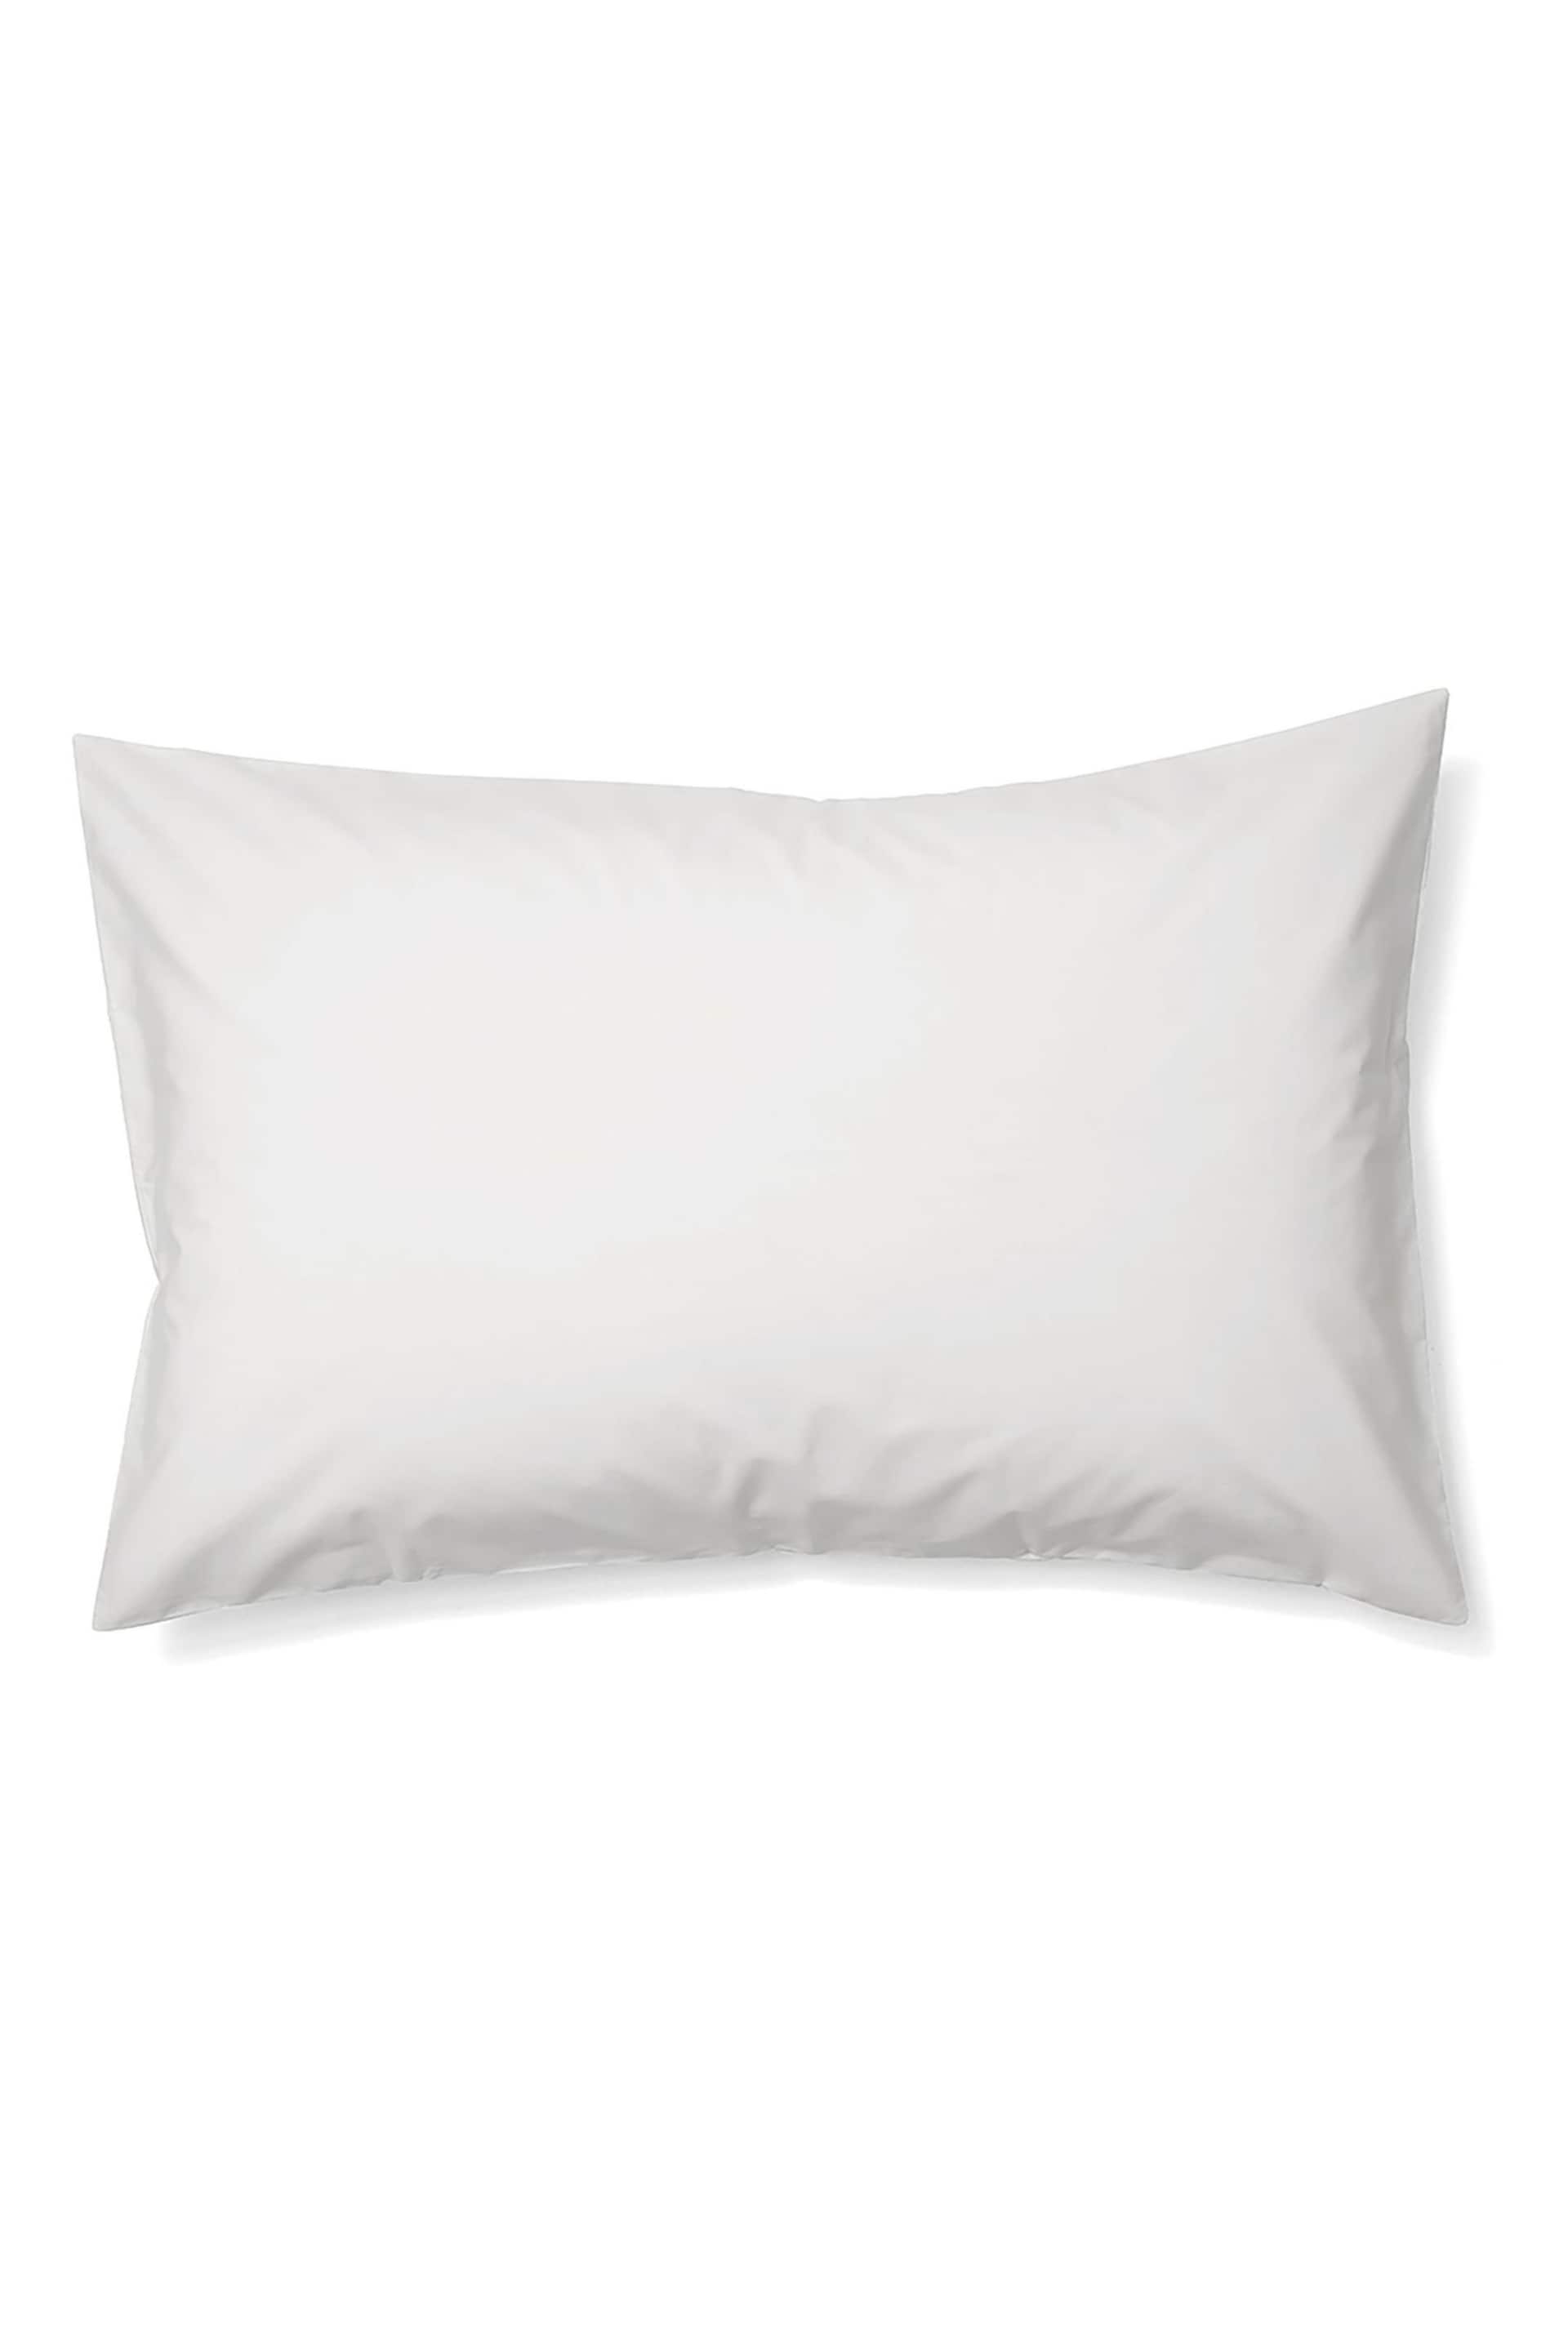 Bedfolk White Classic Cotton Pillowcases - Image 5 of 5